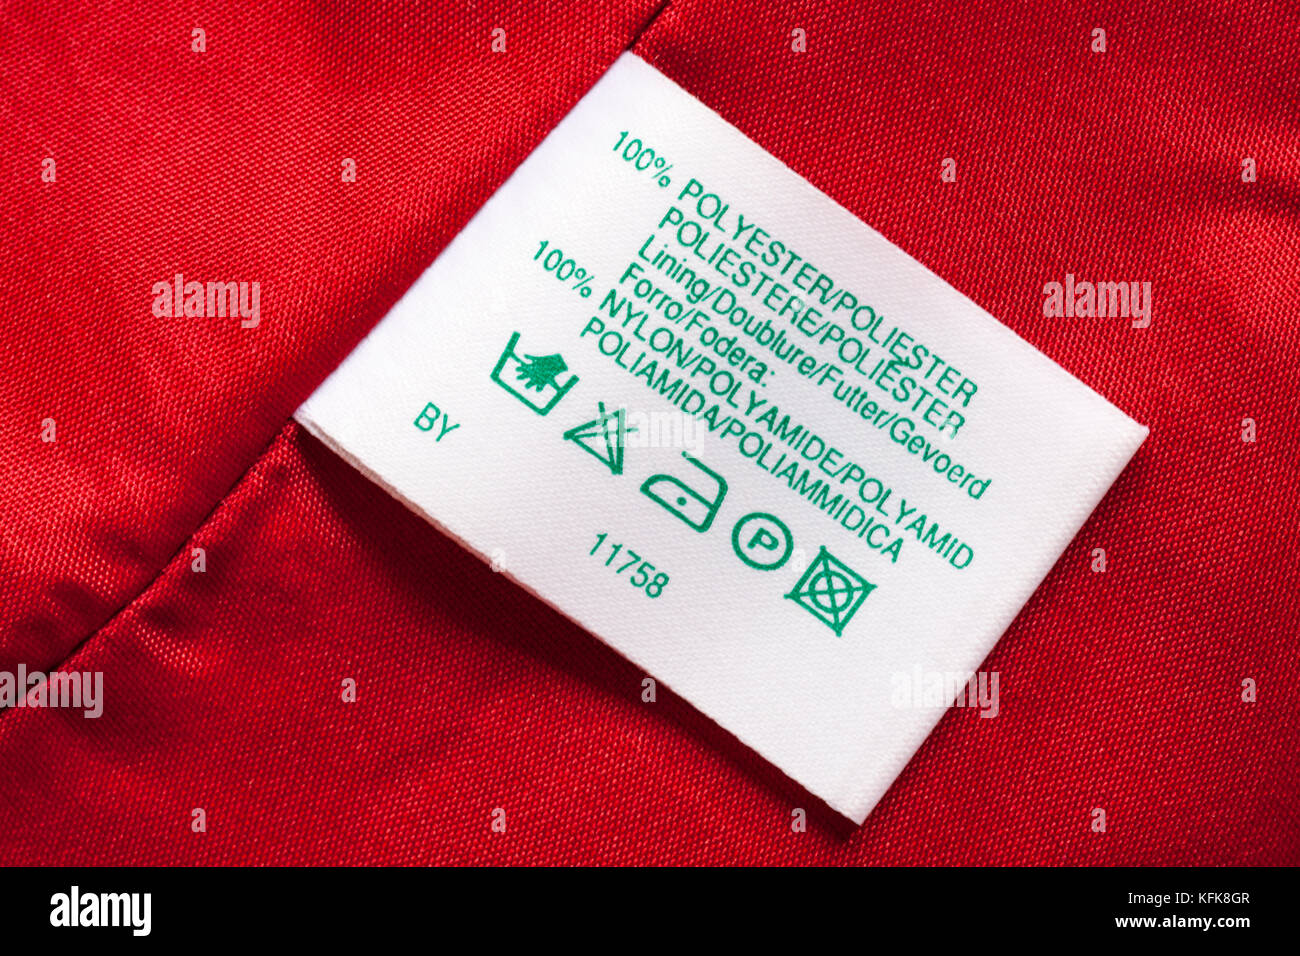 100% polyester lining 100% nylon label in woman's red clothing with wash care symbols instructions in different languages Stock Photo